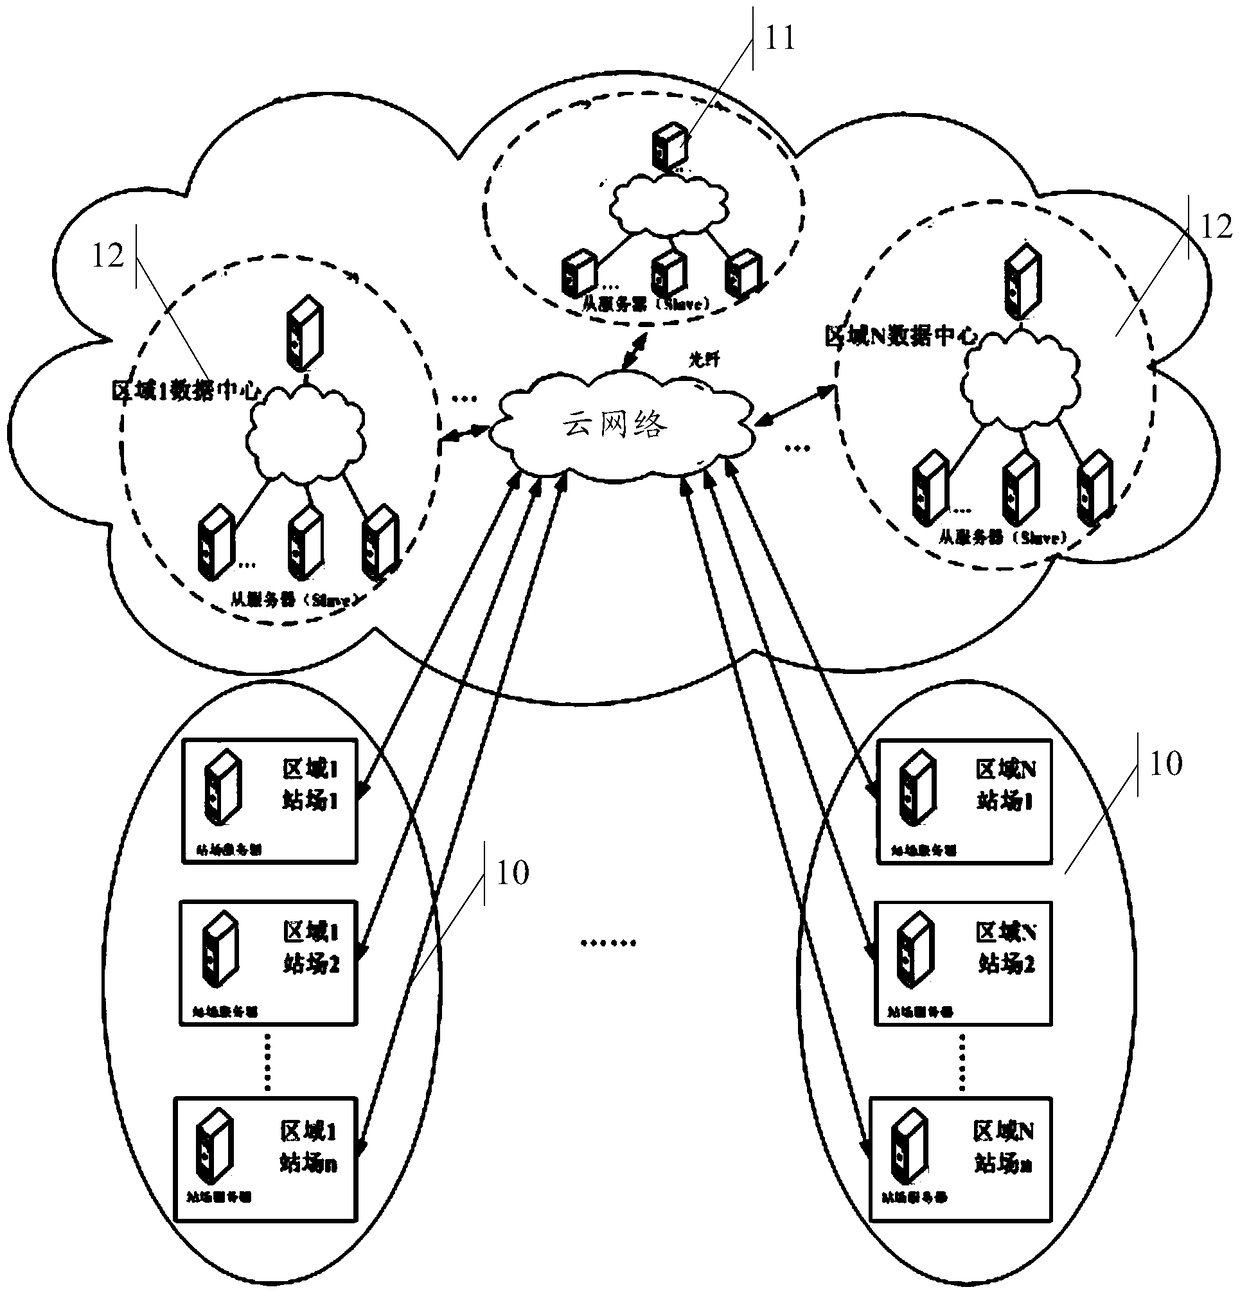 A cloud processing system and implementation method for oil and gas pipelines